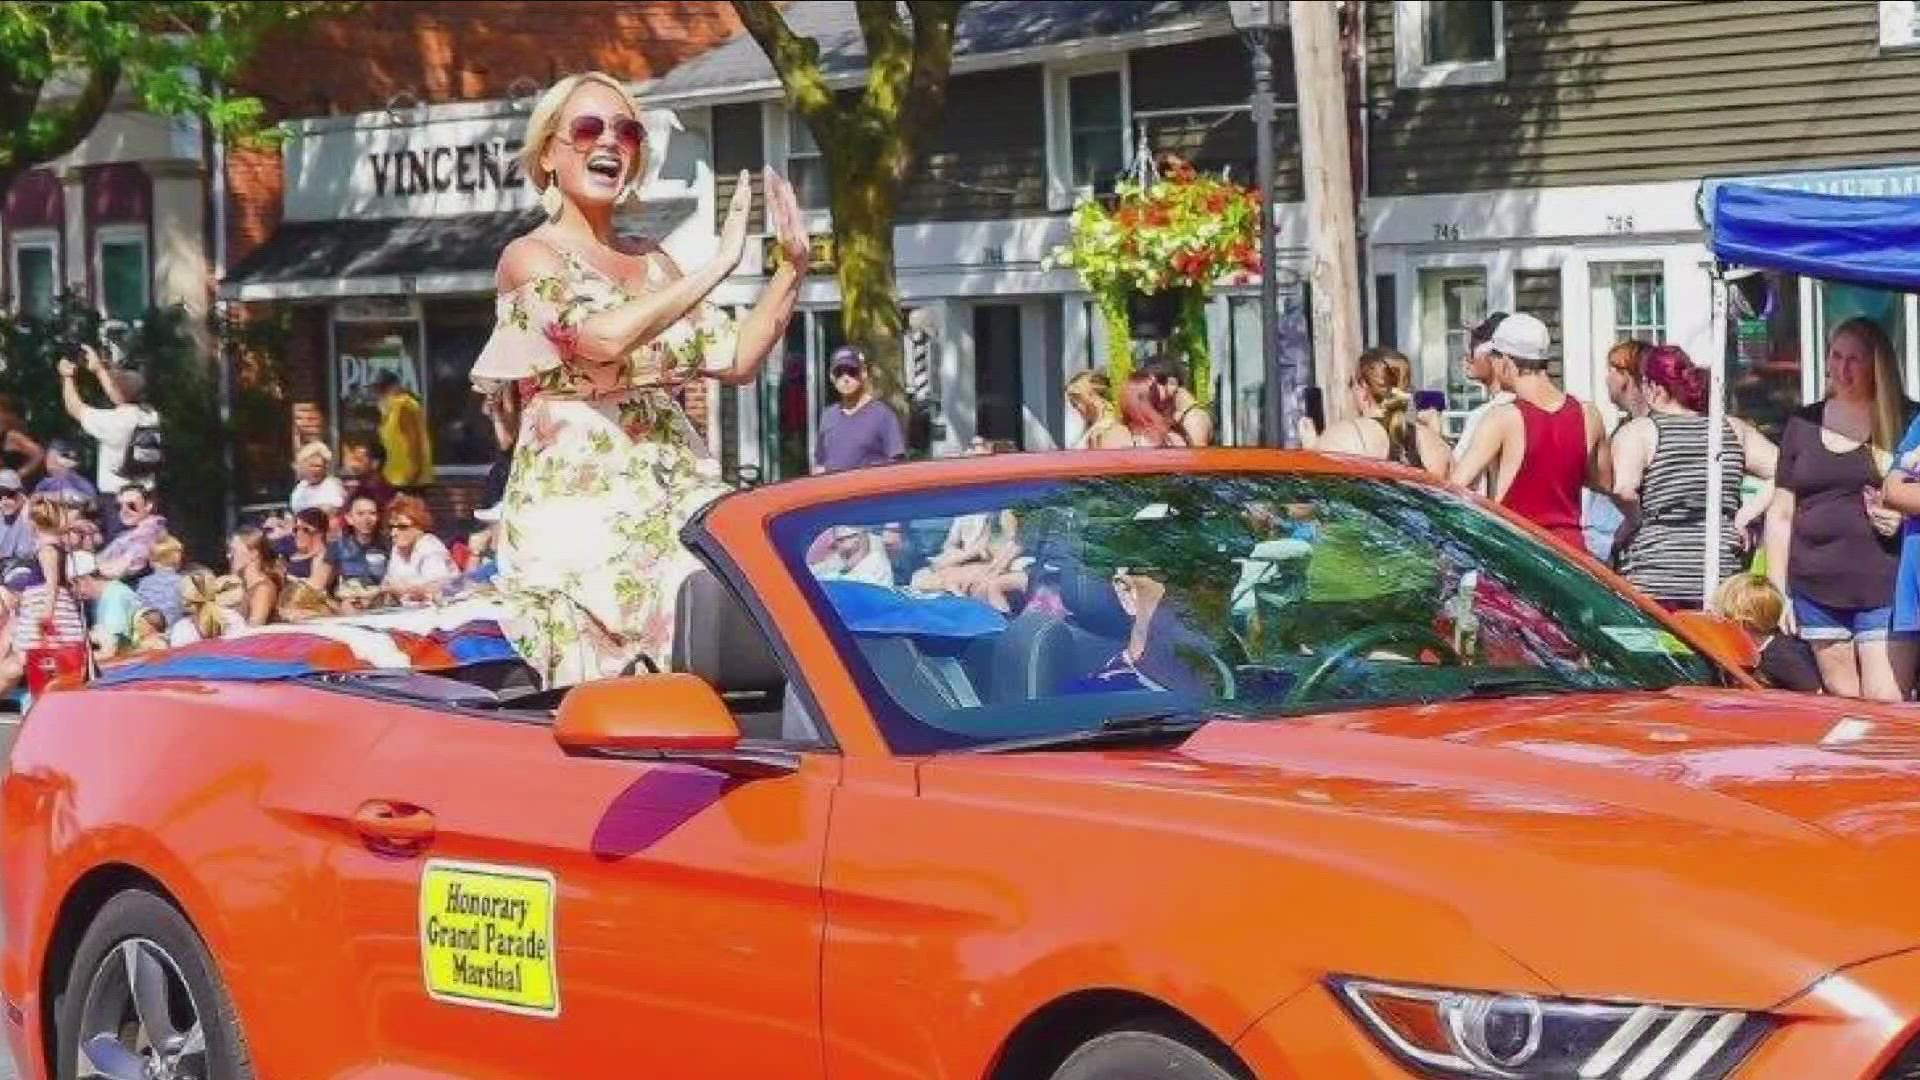 Peach festival kicks off with Kate Welshofer as honorary Grand Parade